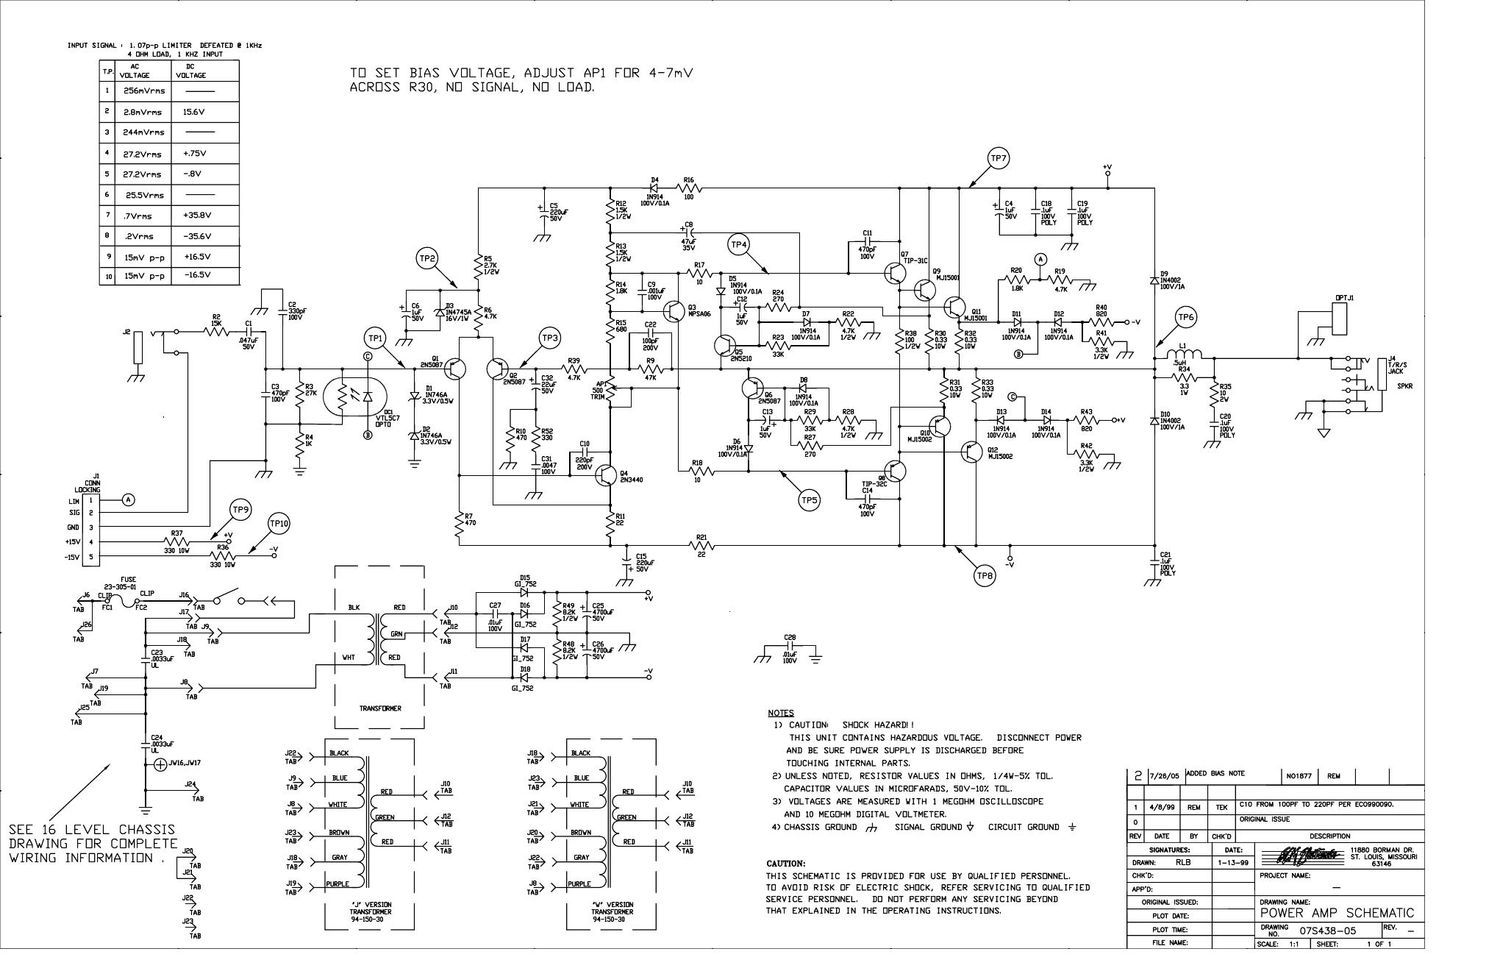 Crate GX 2200H Excaliber Power Amp 07S438 Schematic